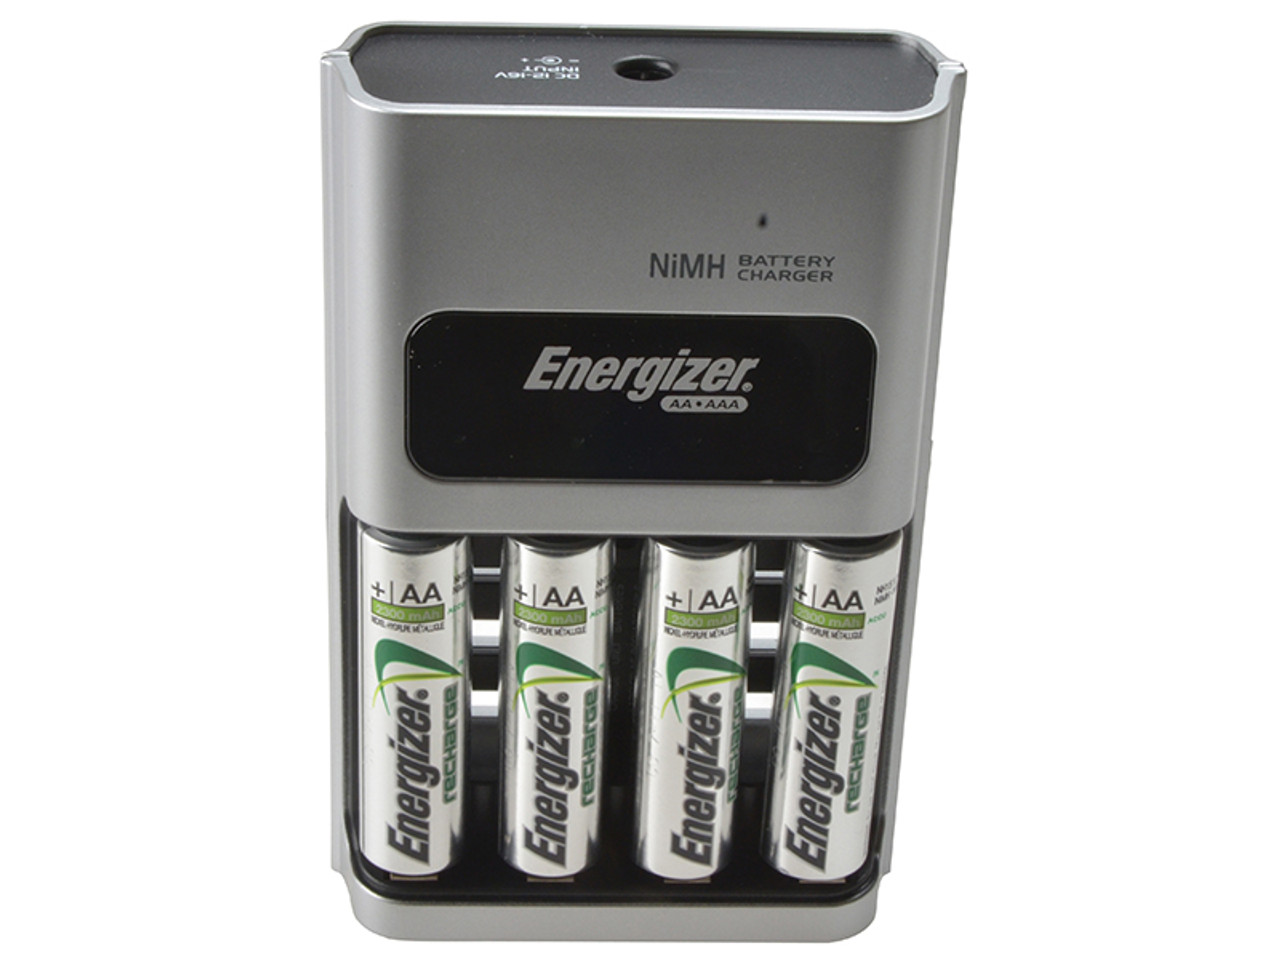 Energizer 1 Hour Battery Charger for AA & AAA Batteries (4 x AA